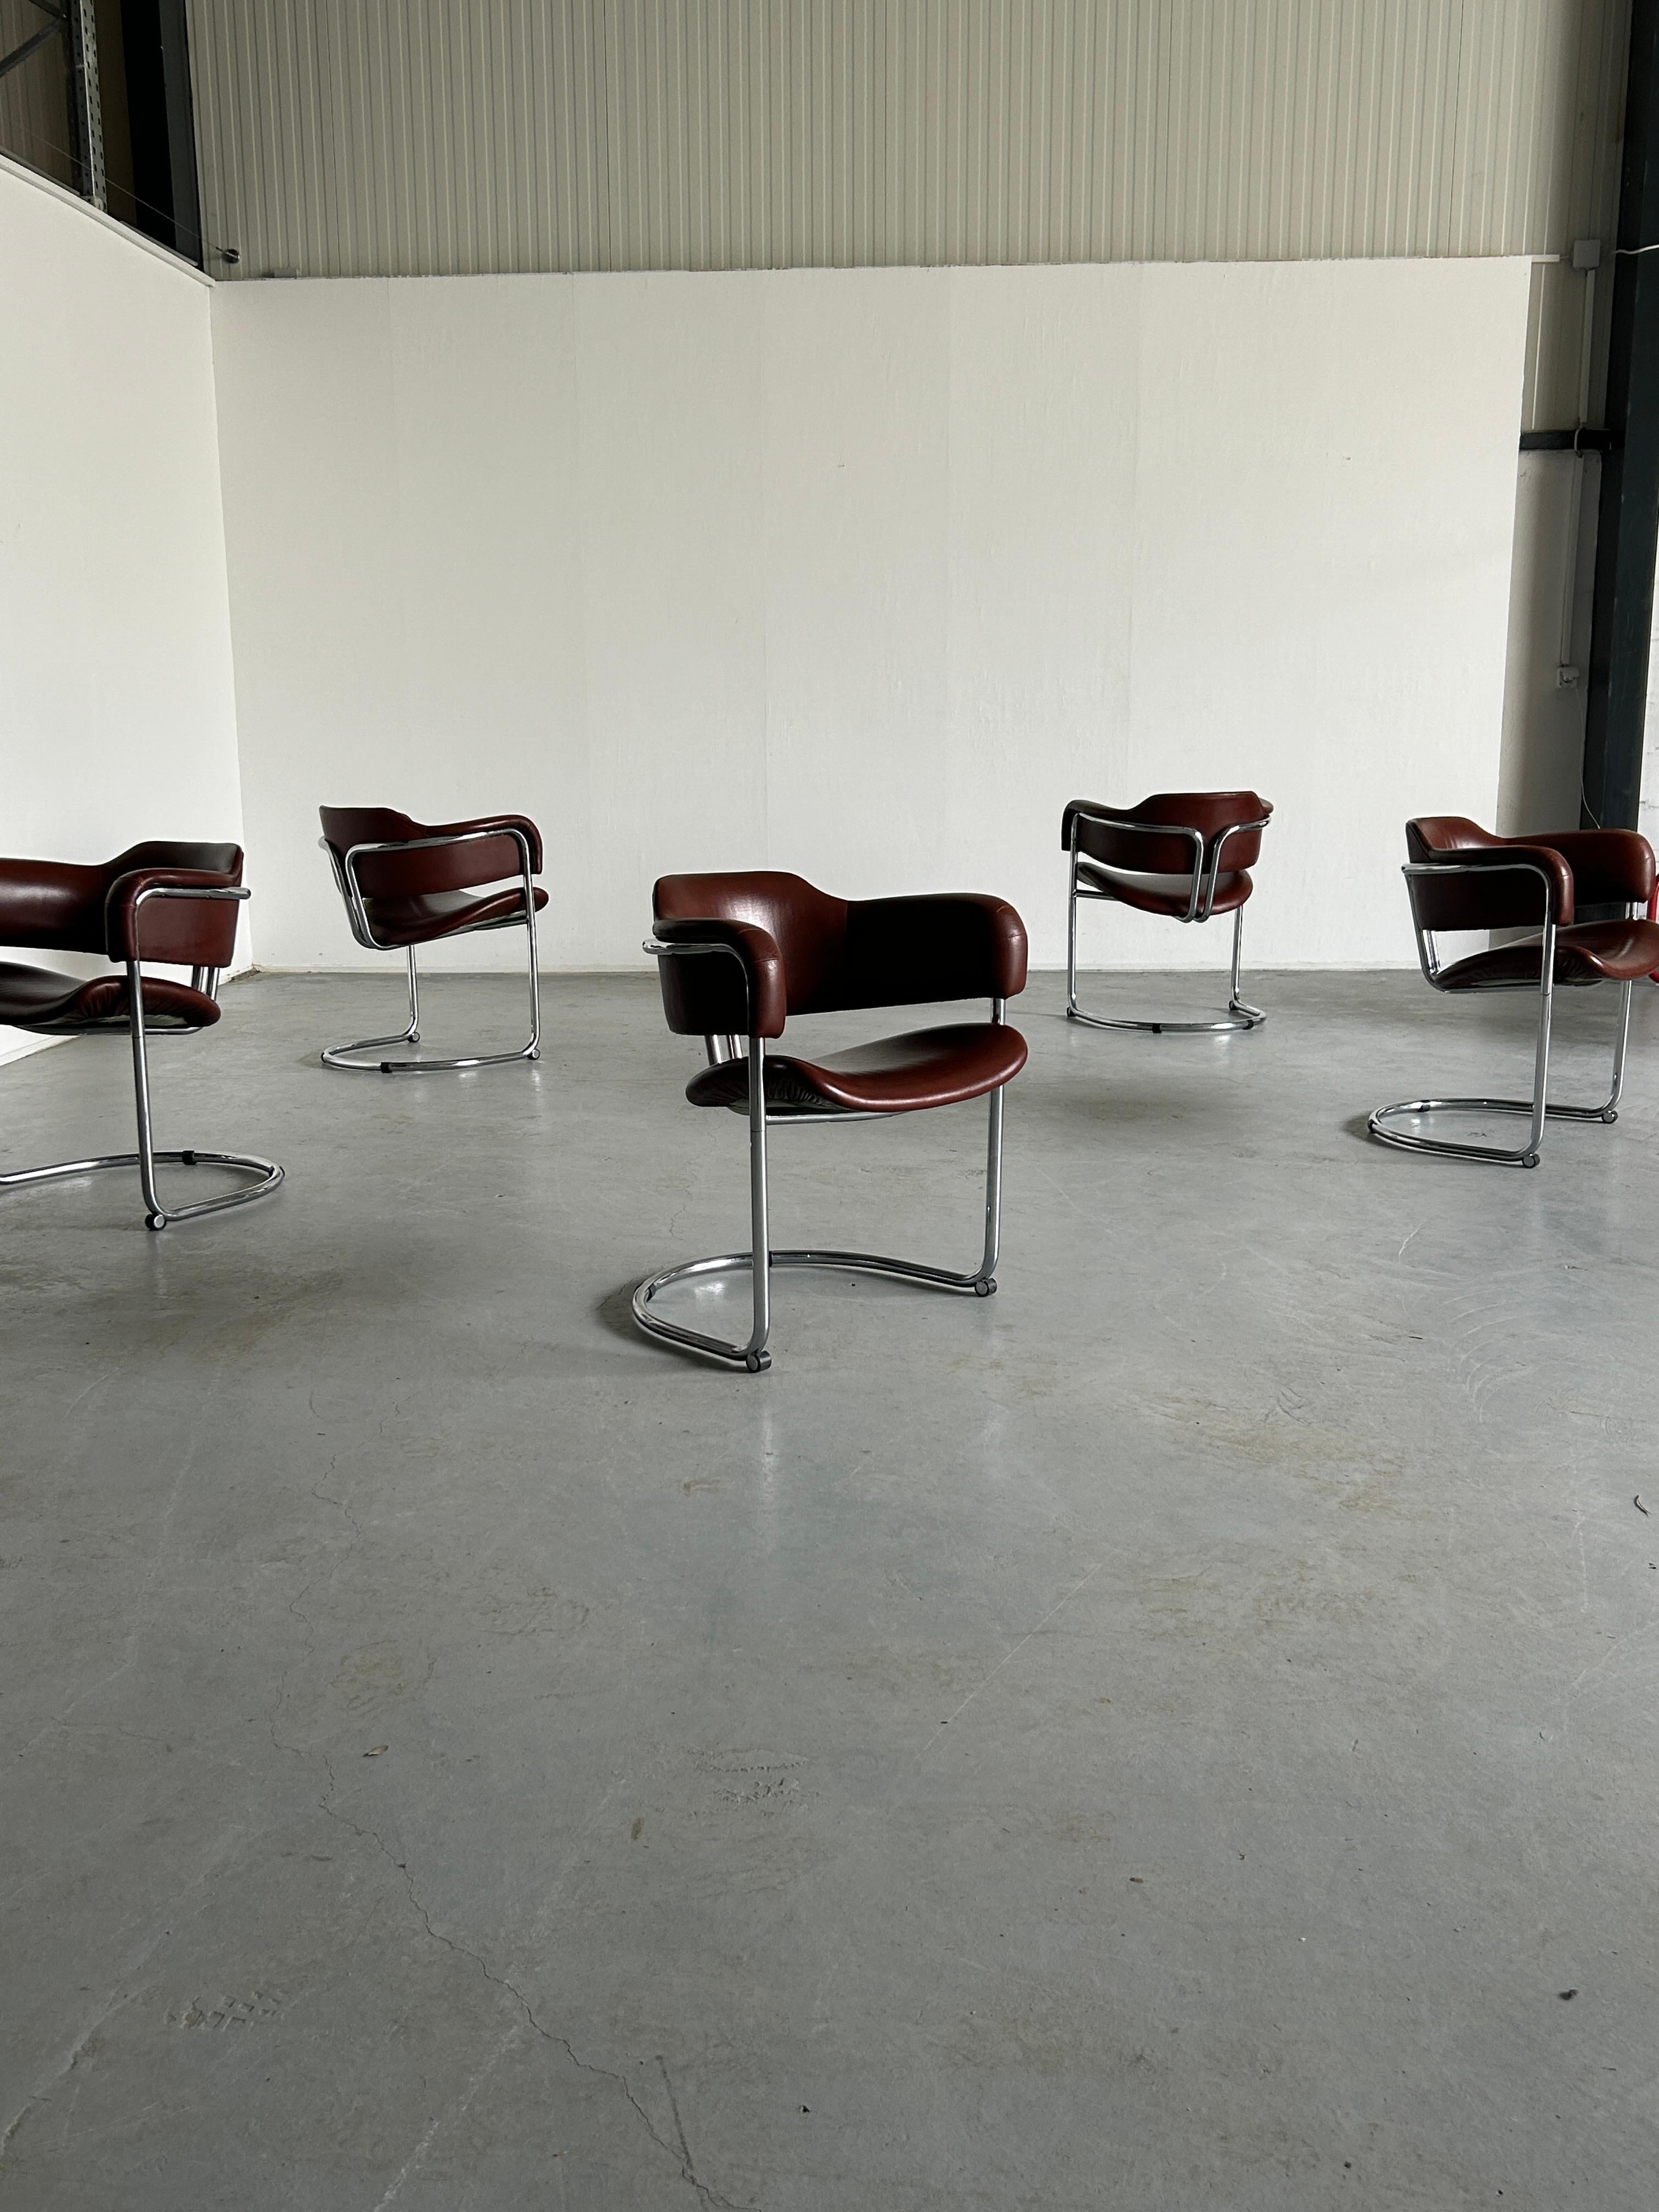 Twelve high-end executive Bauhaus design cantilever armchairs, in style of Vittorio Introini for Mario Sabot.
Thick dark brown faux leather and chromed tubular steel construction.
High-quality Italian production of the 1980s.
Can be used as dining